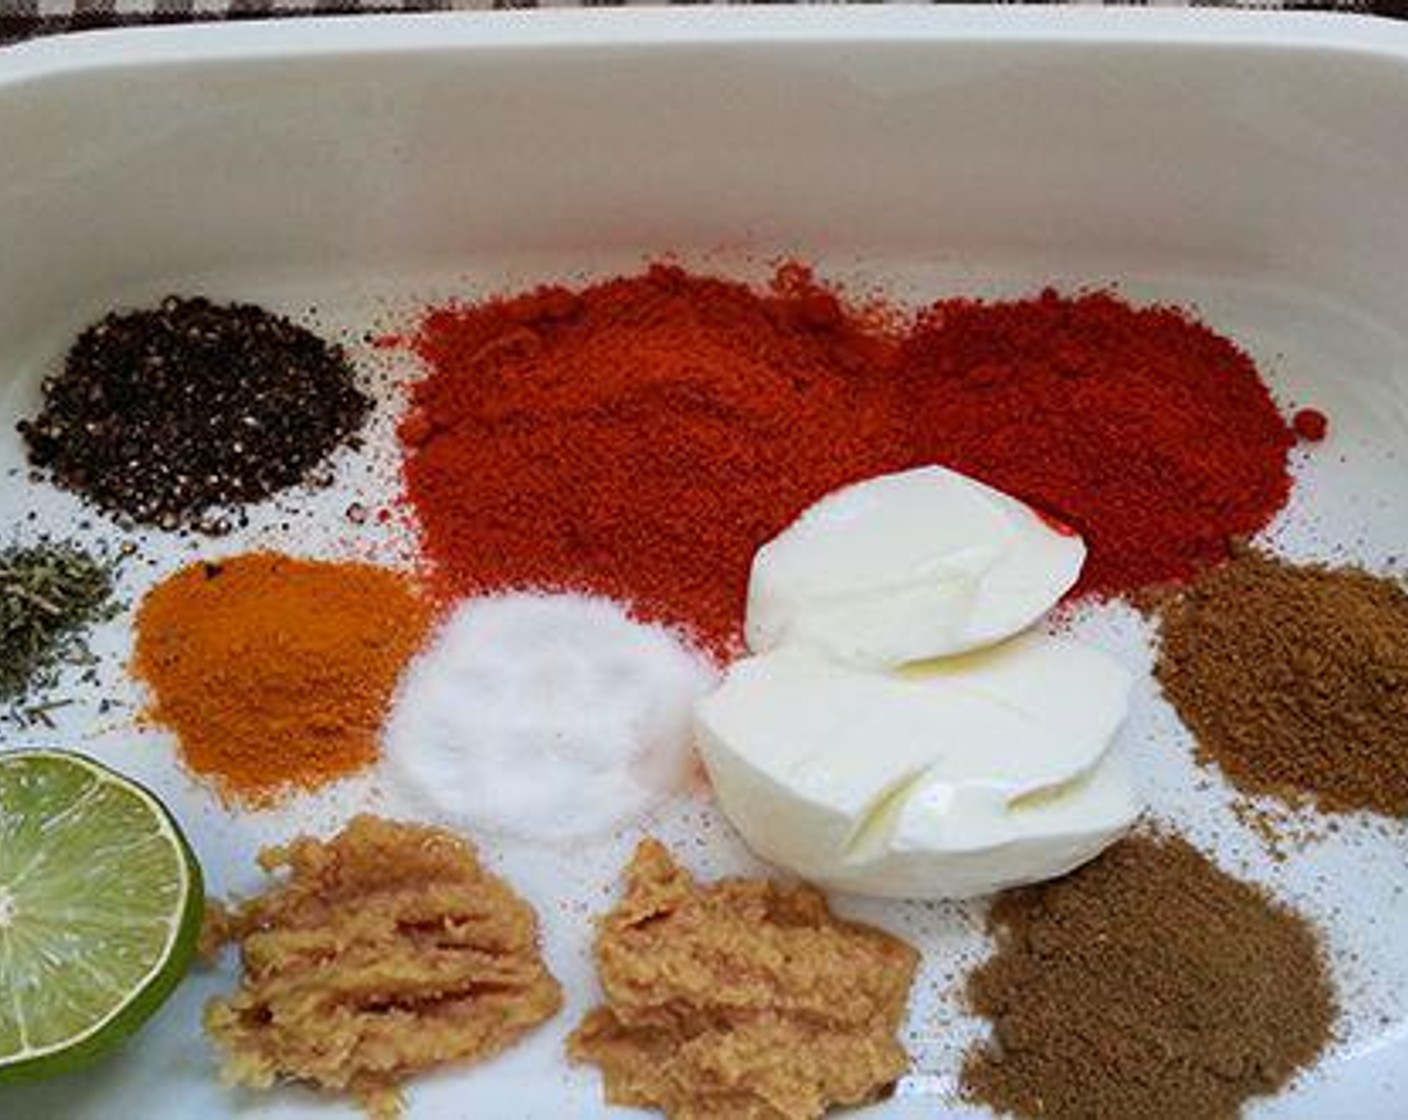 step 2 To a bowl add Thick Yogurt (2 Tbsp), {@10:}, {@12:}, Red Chili Powder (1/2 Tbsp), Kashmiri Red Chili Powder (1 tsp), Ginger Paste (1 tsp), Garlic Paste (1 tsp), Ground Turmeric (1/2 tsp), Garam Masala (1/2 tsp), Ground Cumin (1/2 tsp), Ground Black Pepper (1/4 tsp), Kasoori Methi Powder (1 pinch), and {@11:} for marination. Combine everything well, if required add a table spoon of water.